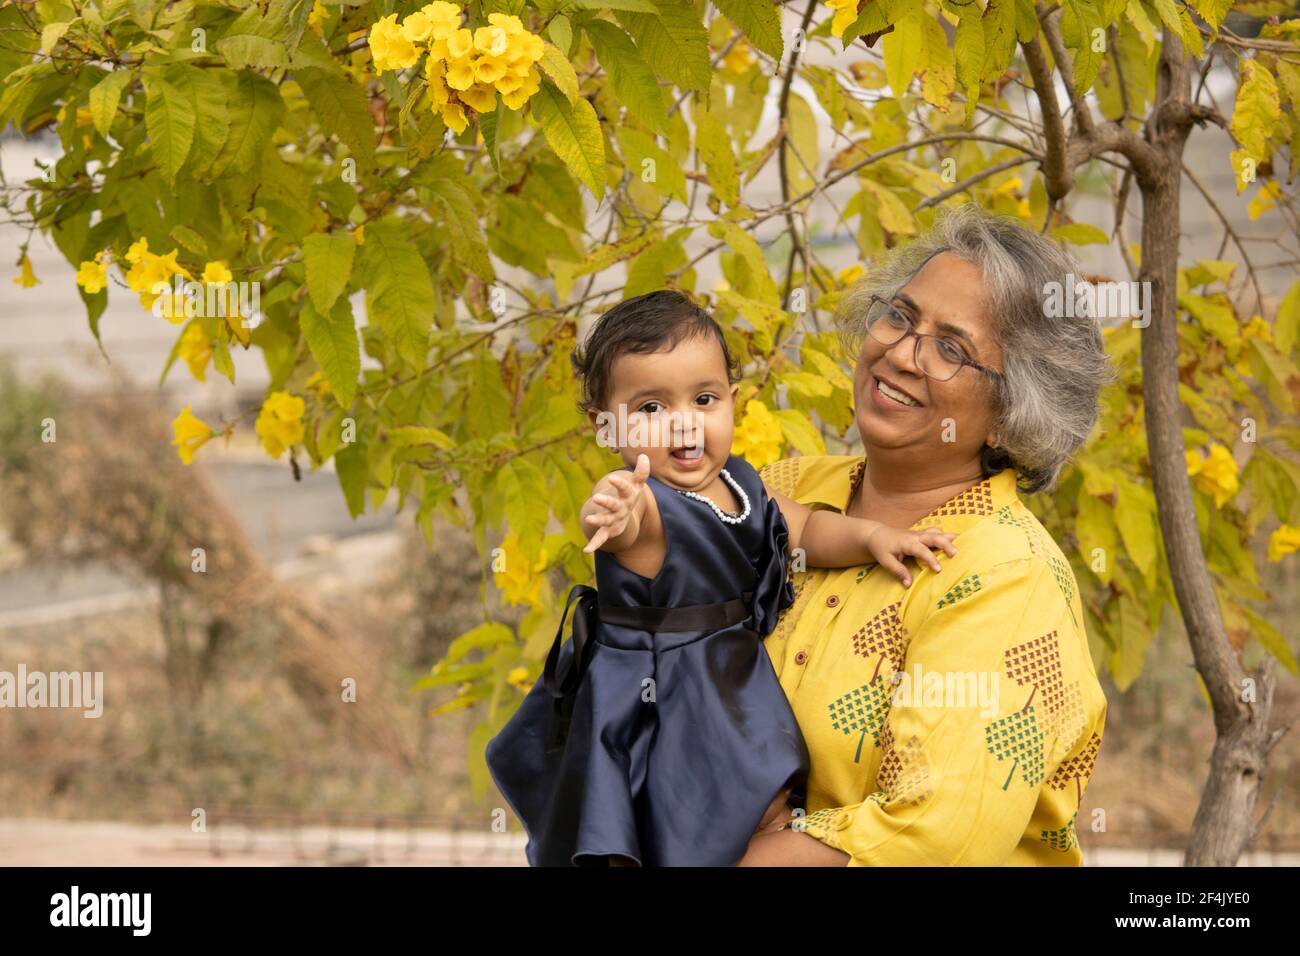 Happy moments with grandma, indian or asian senior lady spending quality time with her grand daughter in garden. Stock Photo